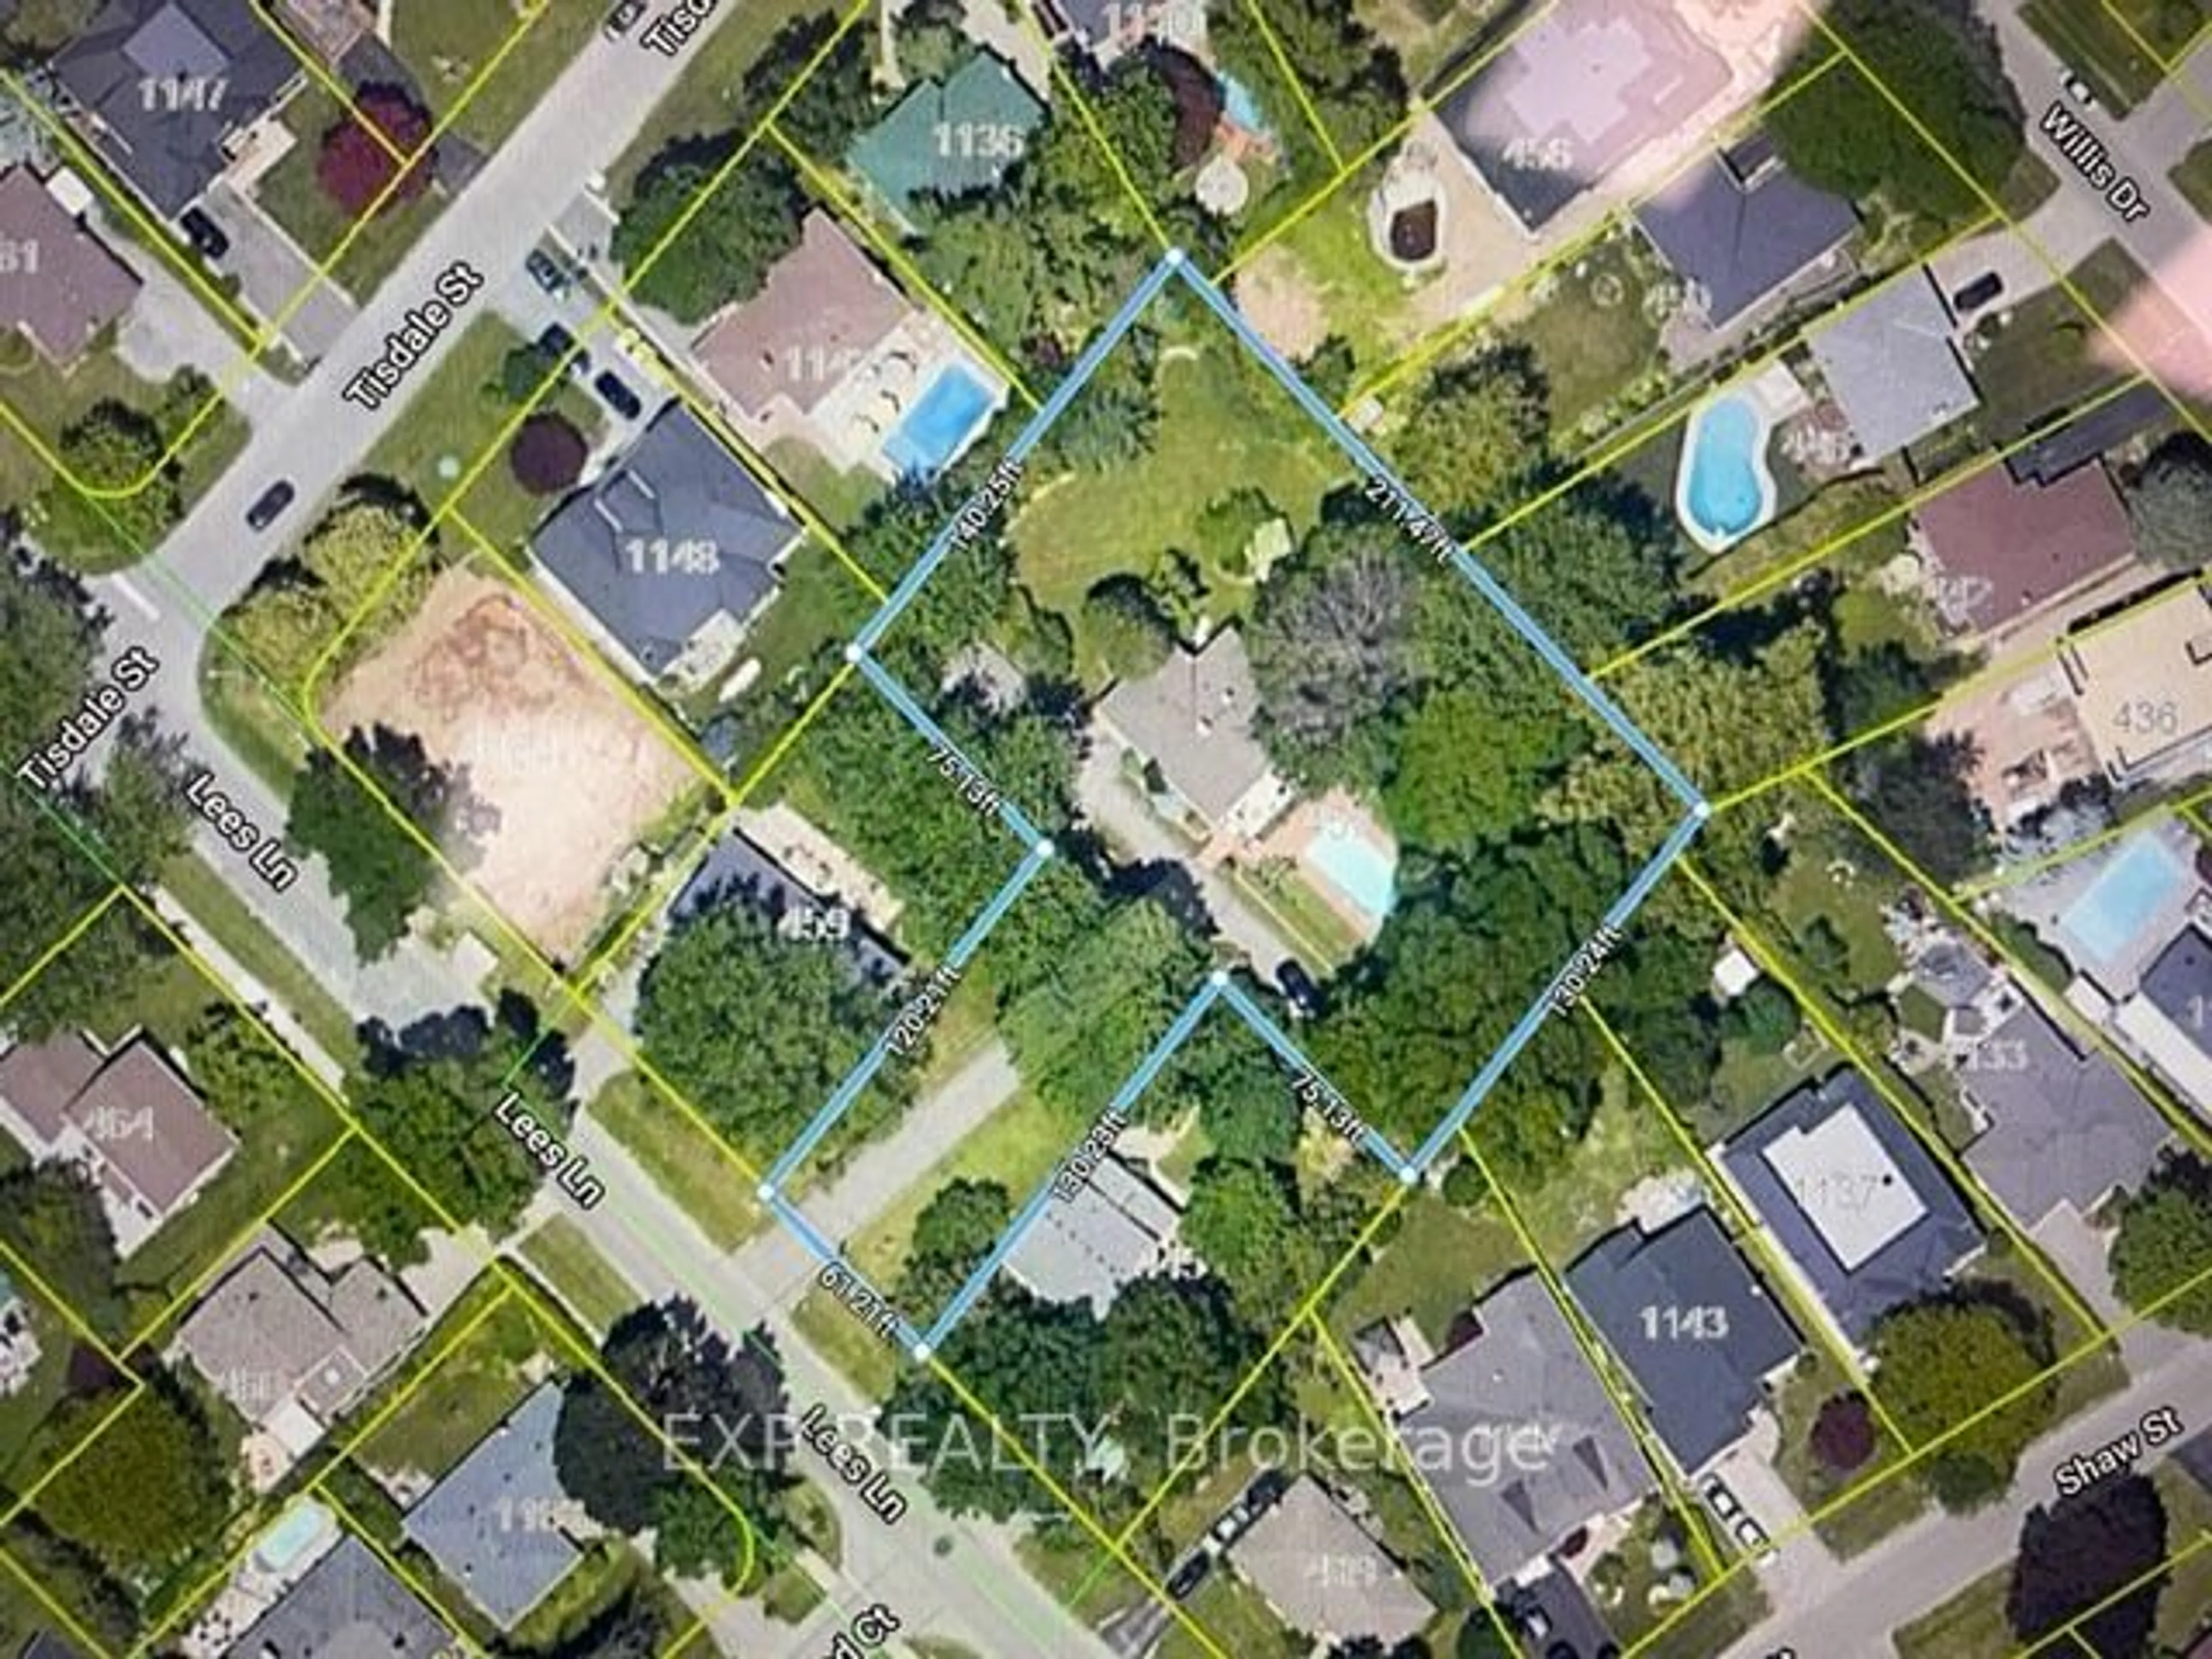 Picture of a map for 457 Lees Lane, Oakville Ontario L6L 4S9